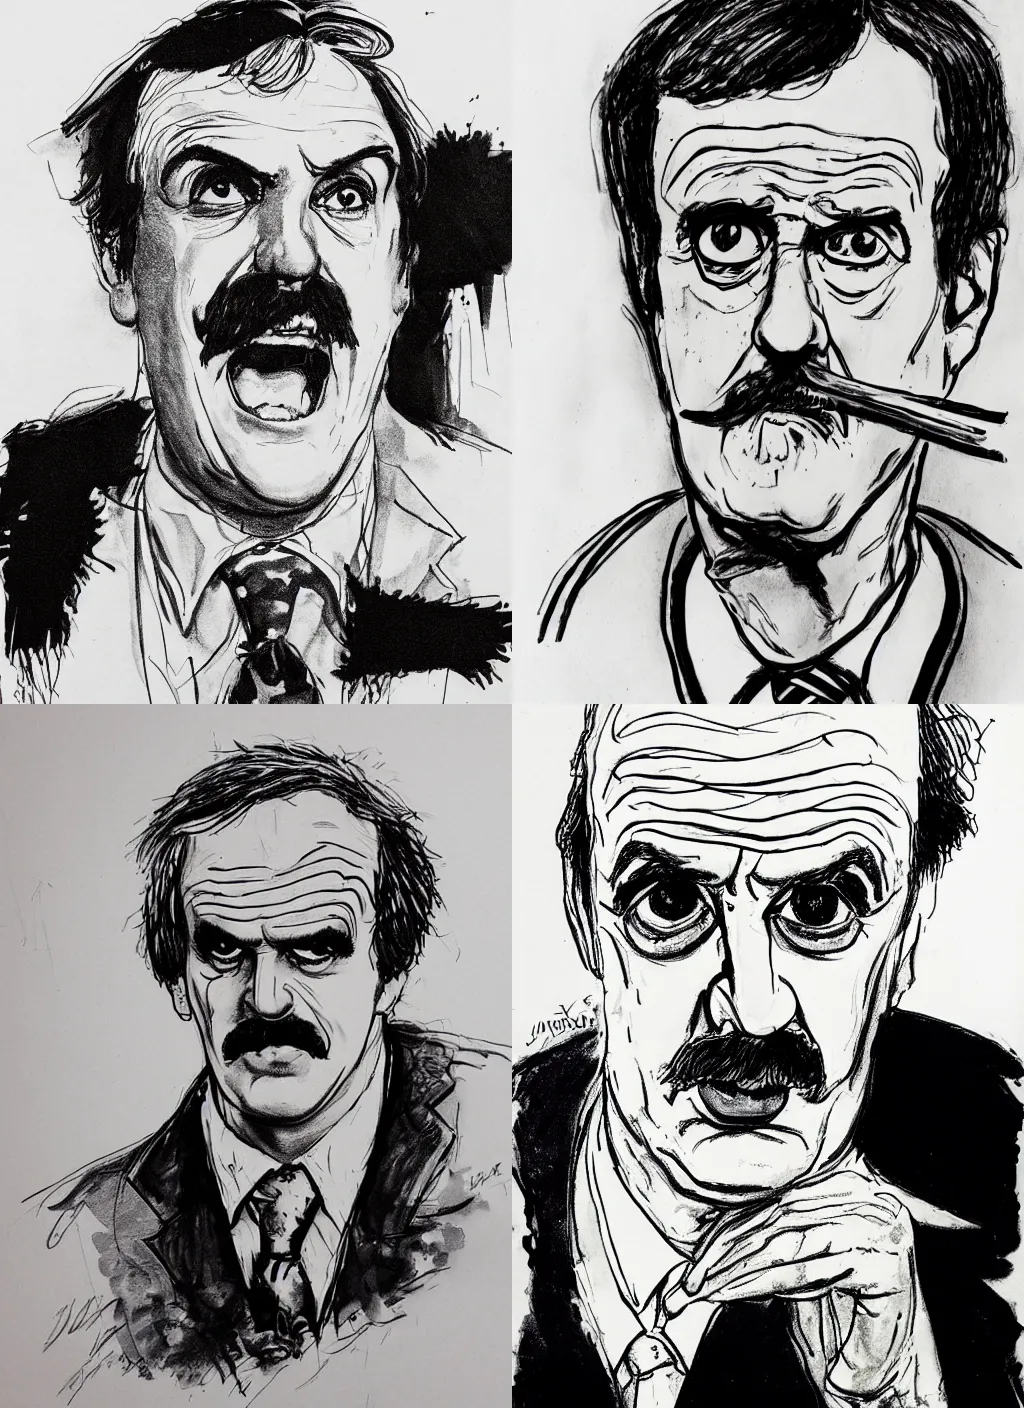 Prompt: a loose wild messy ink sketch portrait of young john cleese as basil fawlty in the style of ralph steadman, caricature, dramatic